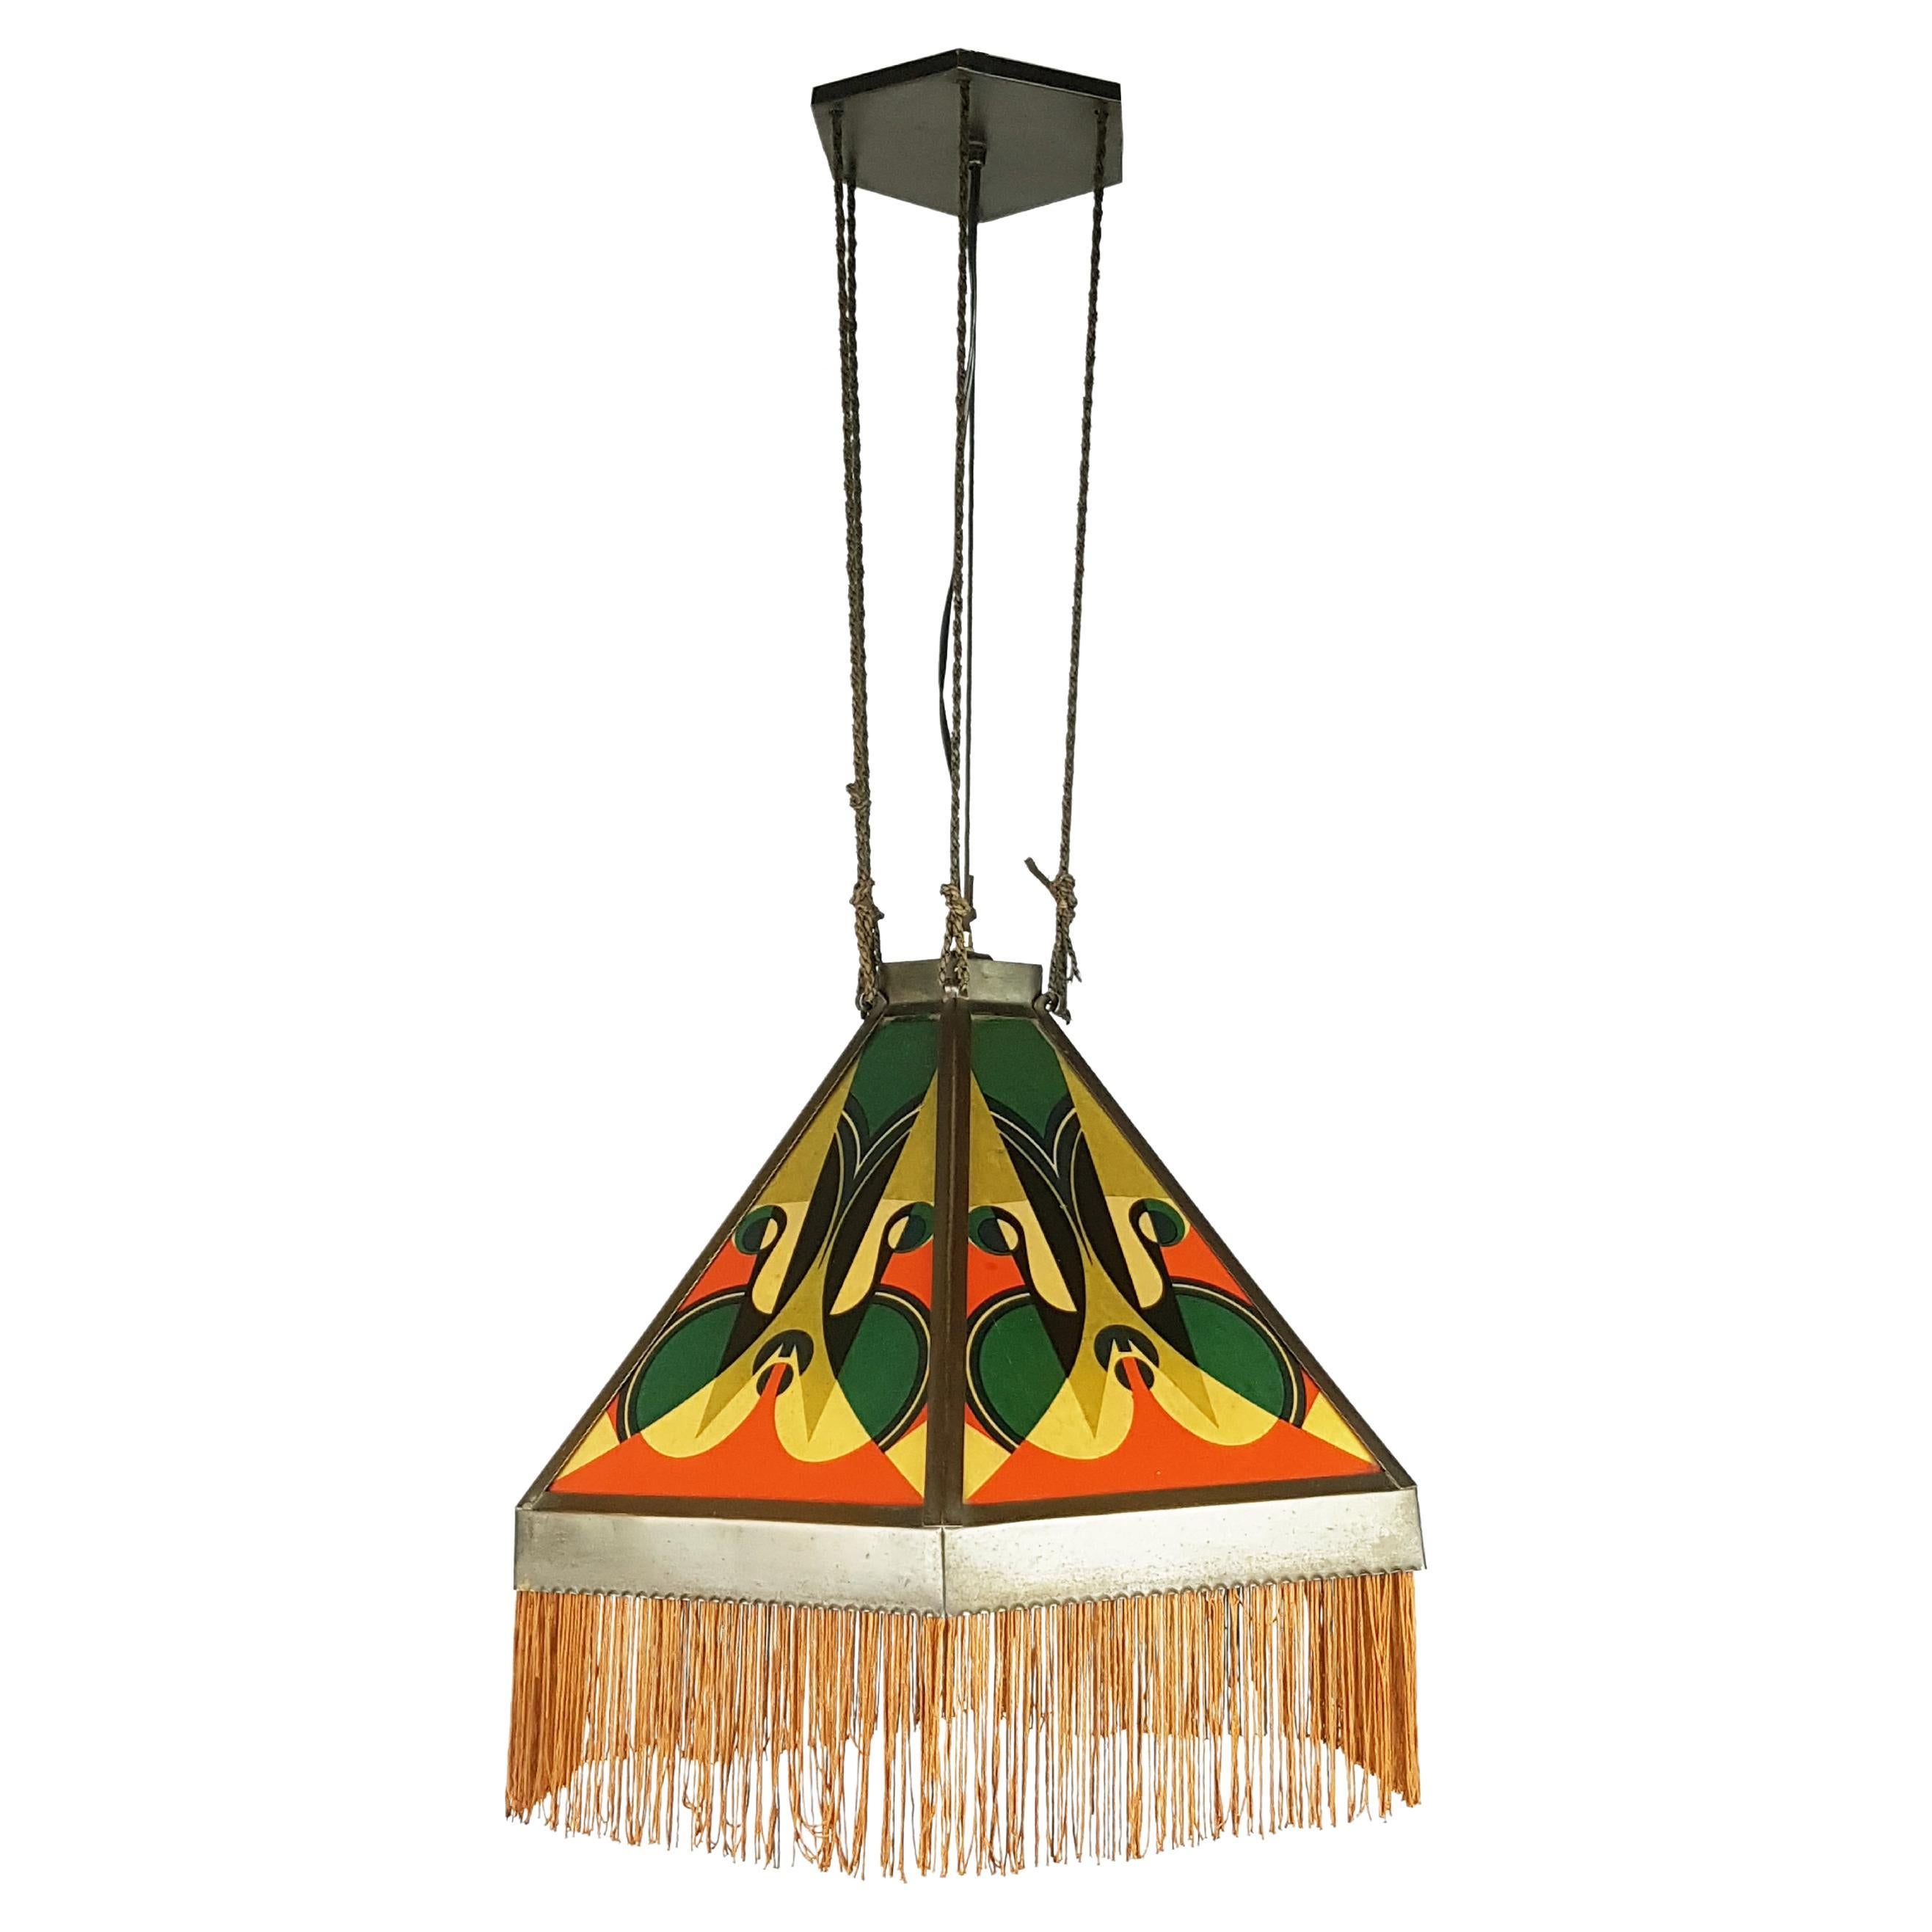 Copper & Printed Glass Art Deco Pendant Lamp Attributed to the Amsterdam School